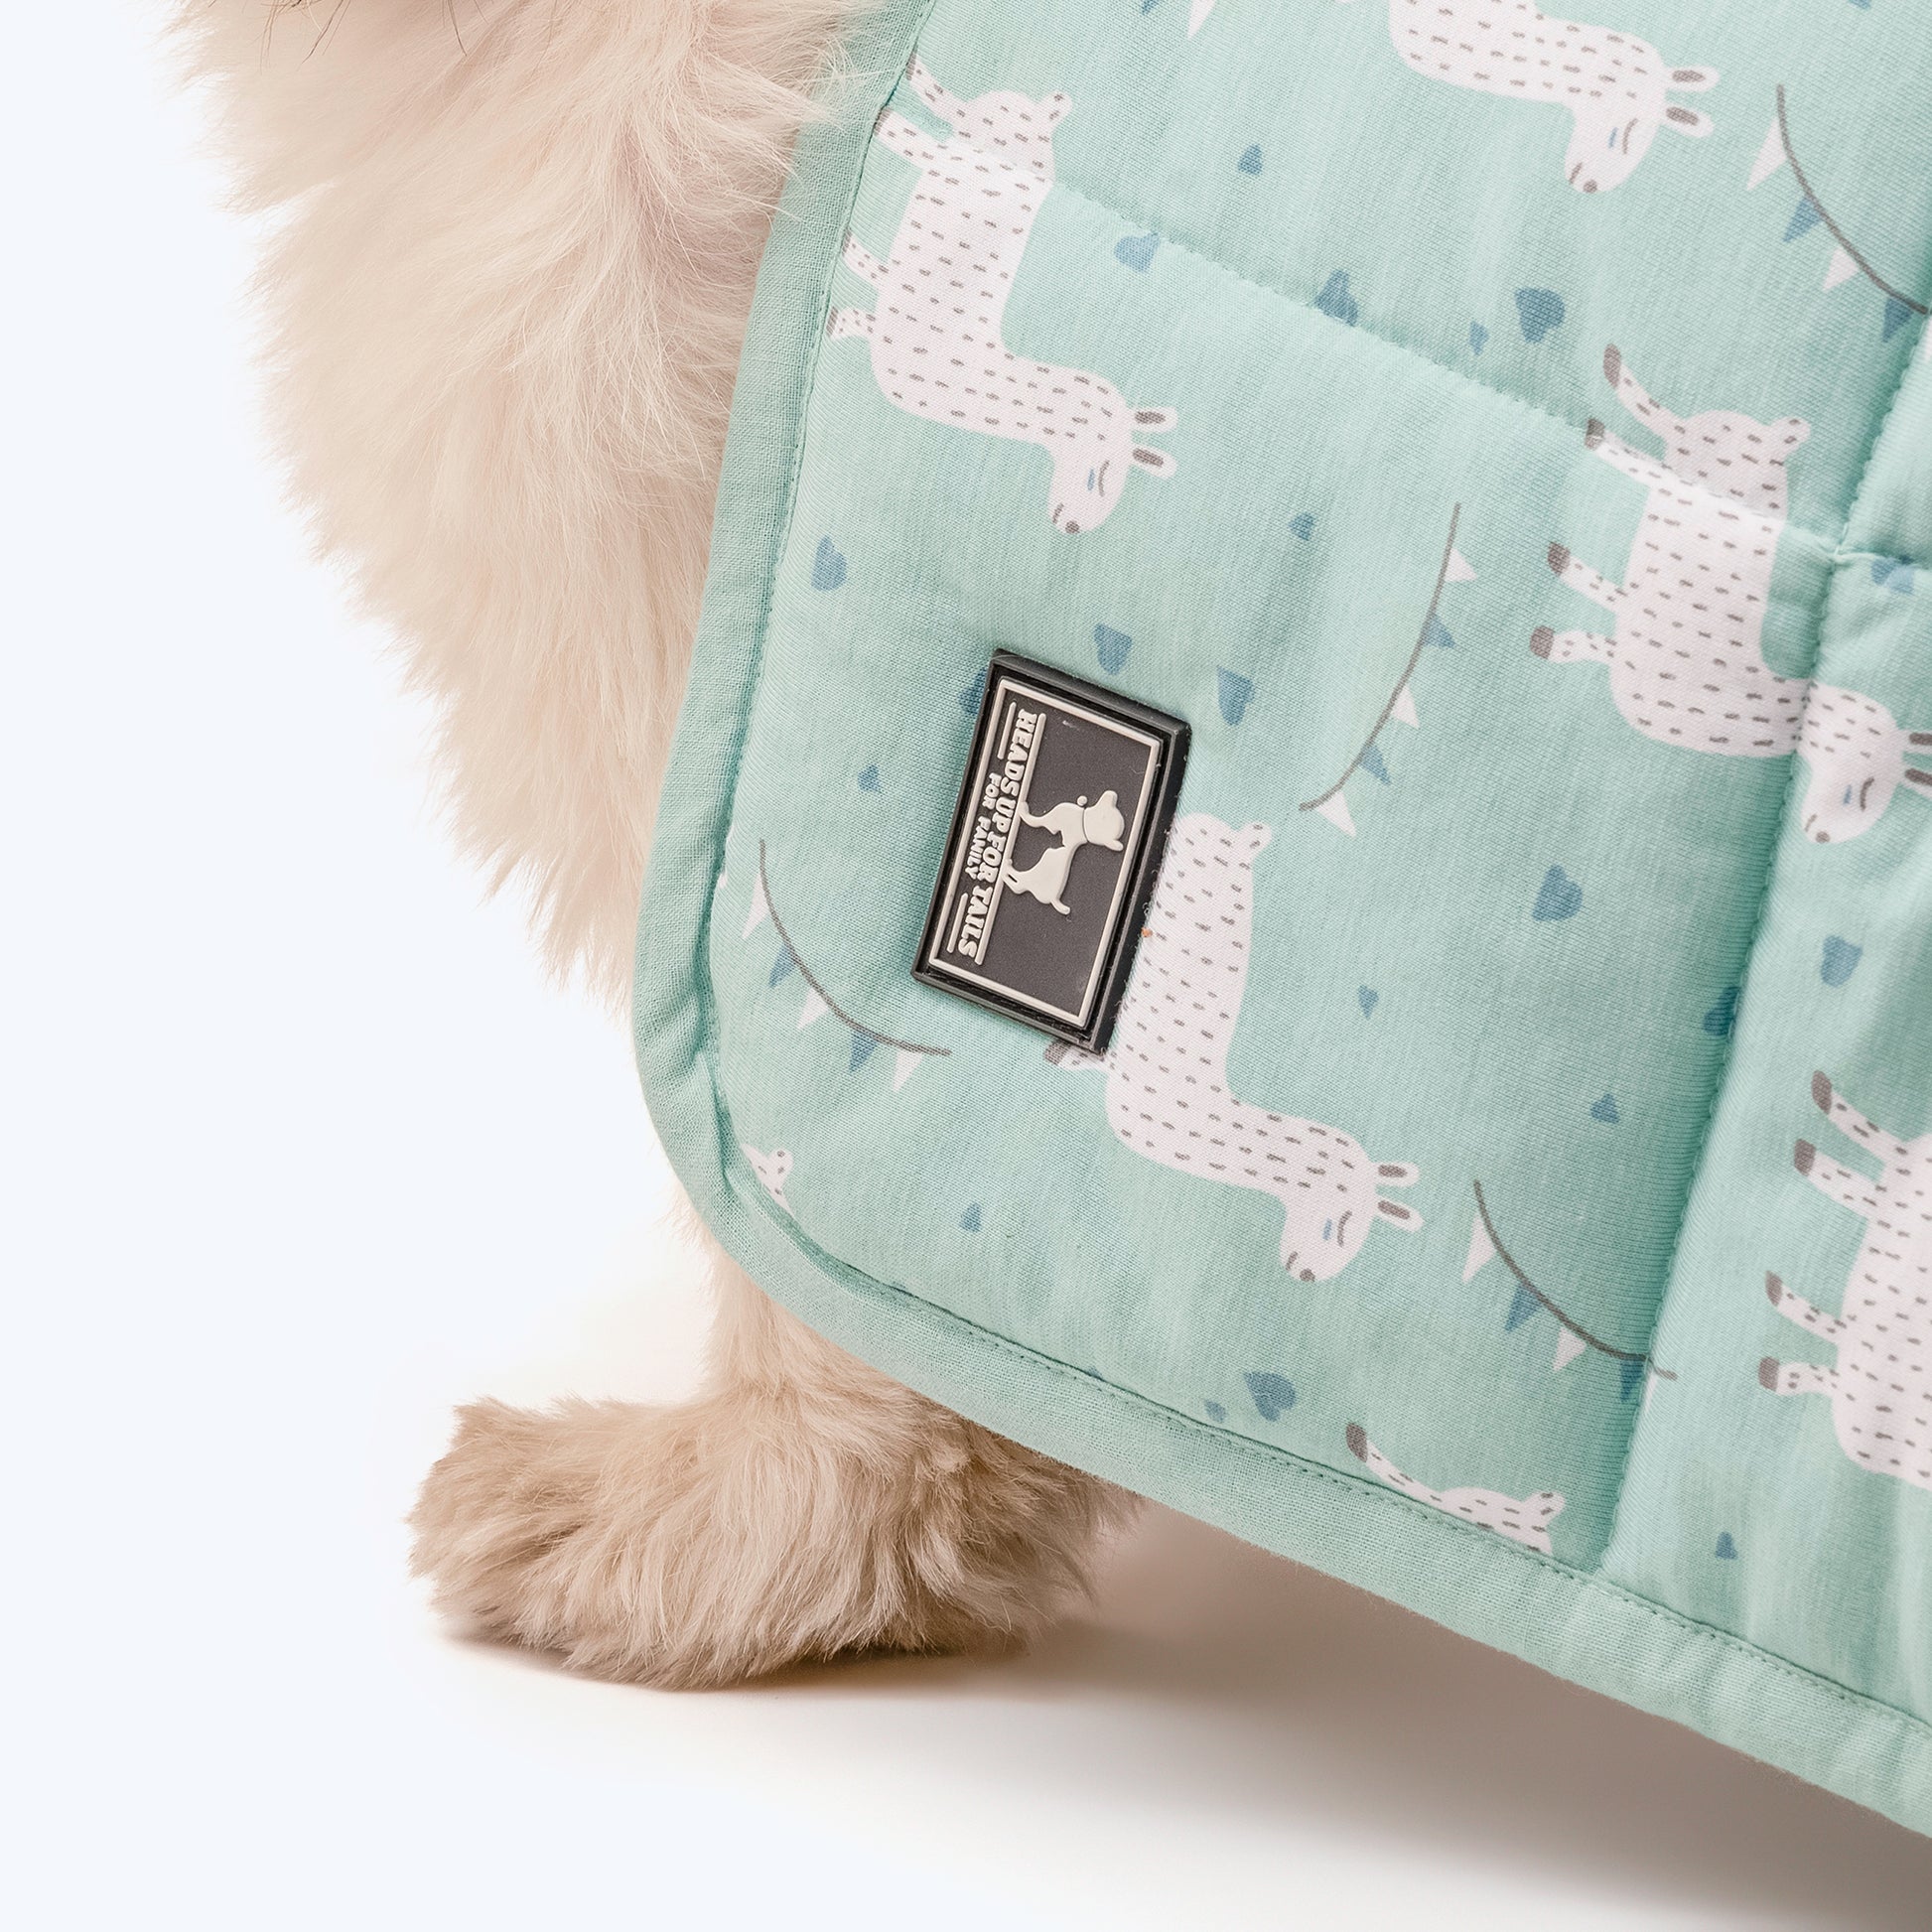 HUFT Personalised Cuddle Bundle Puppy & Kitten Blanket - Pastel Blue - Heads Up For Tails